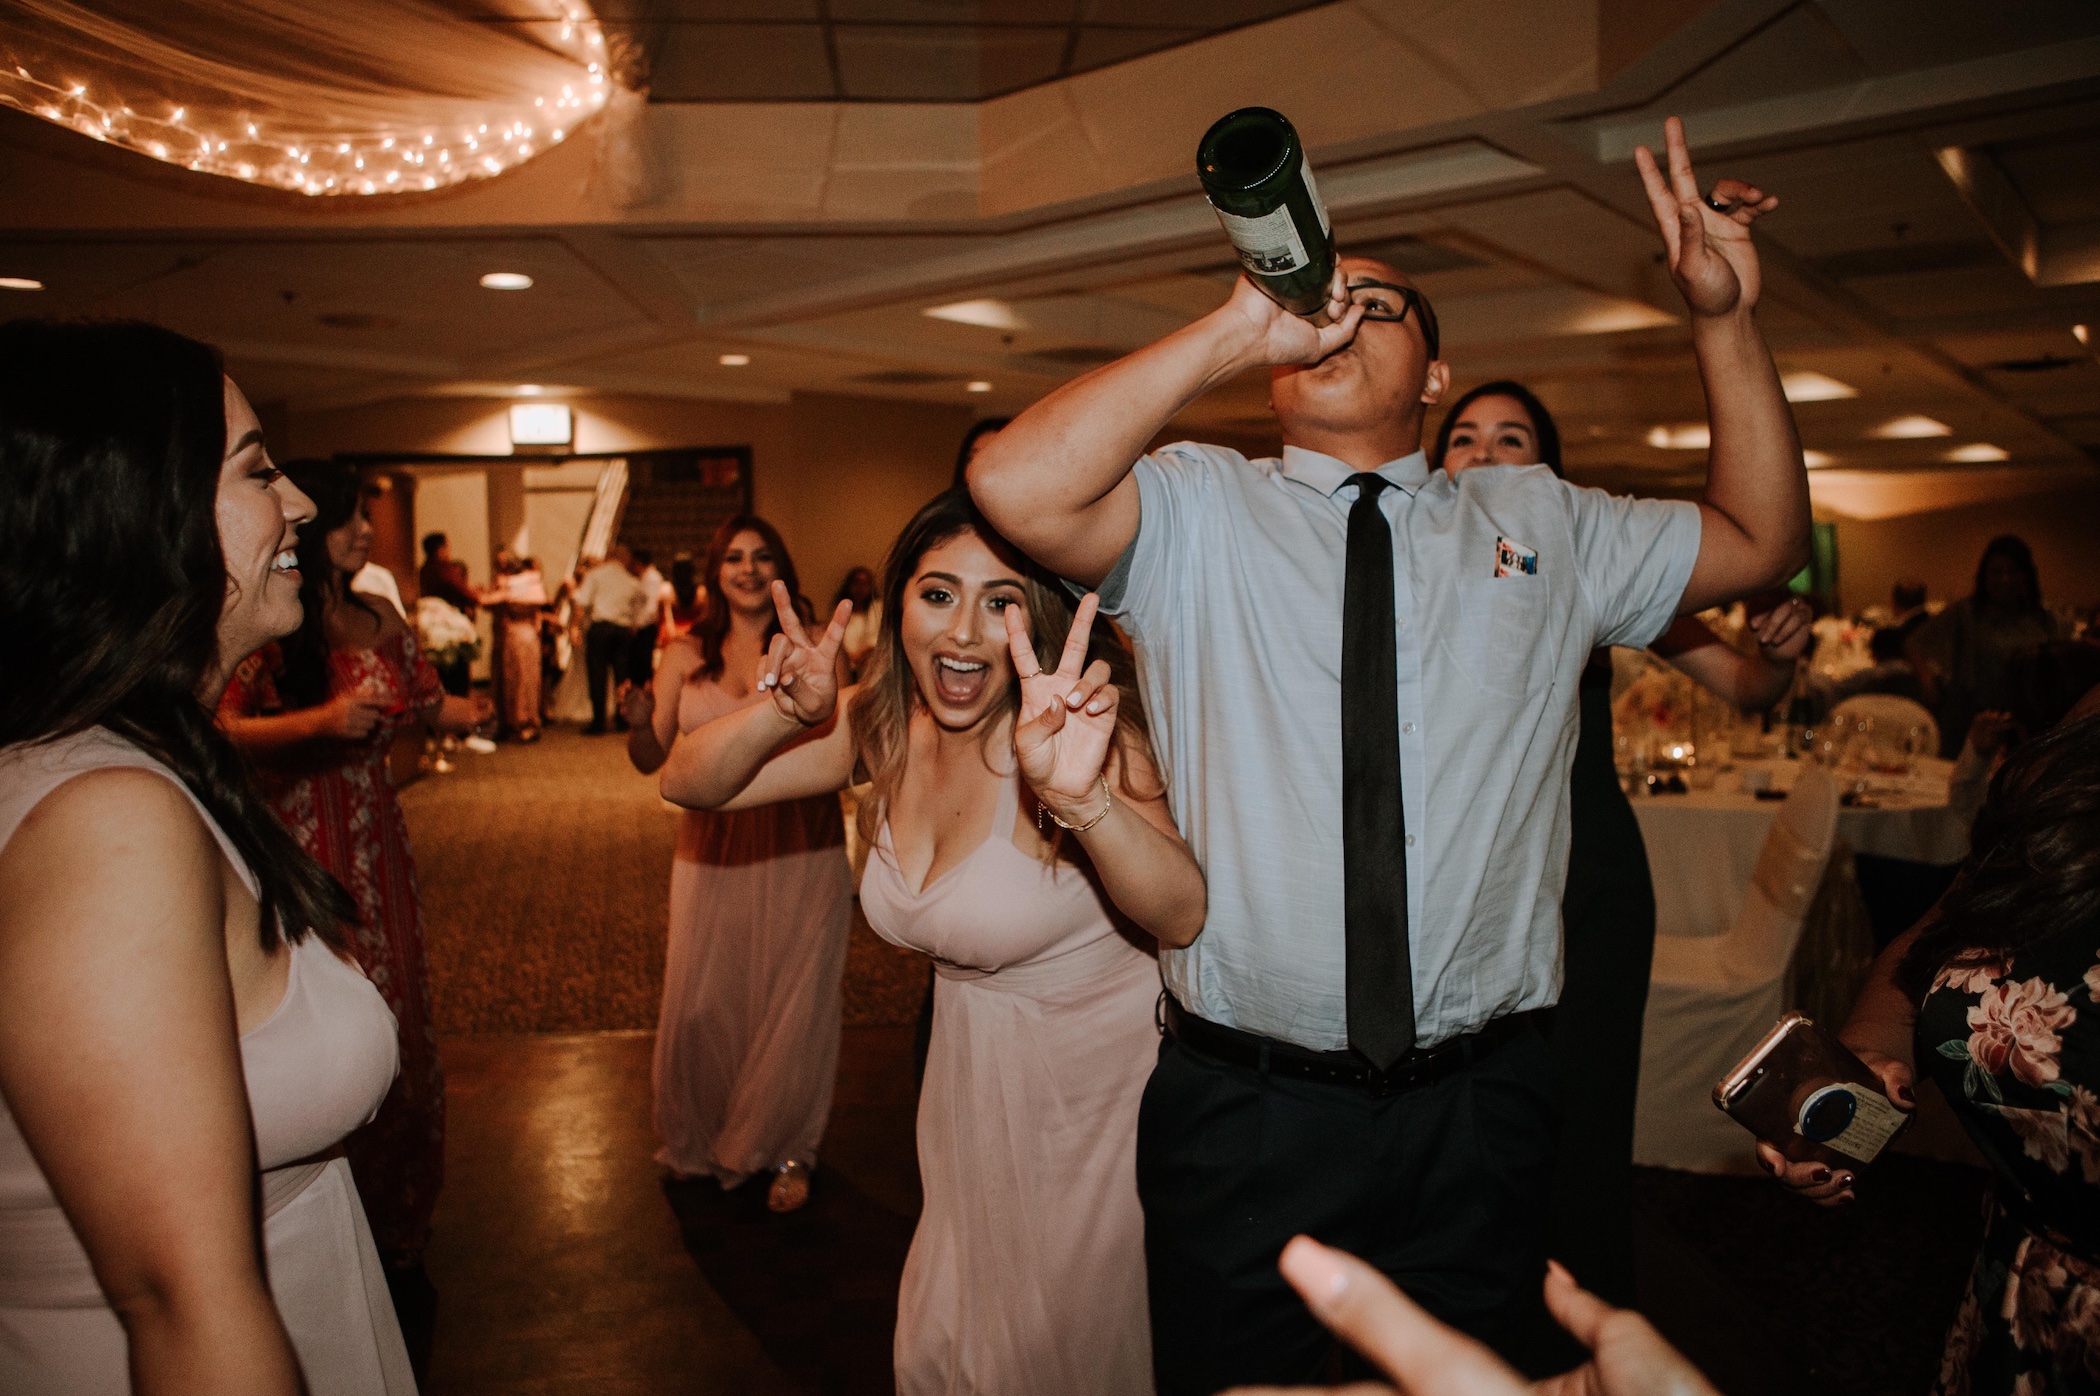 People partying, one man drinking from bottle; image by Omar Lopez, via Unsplash.com.